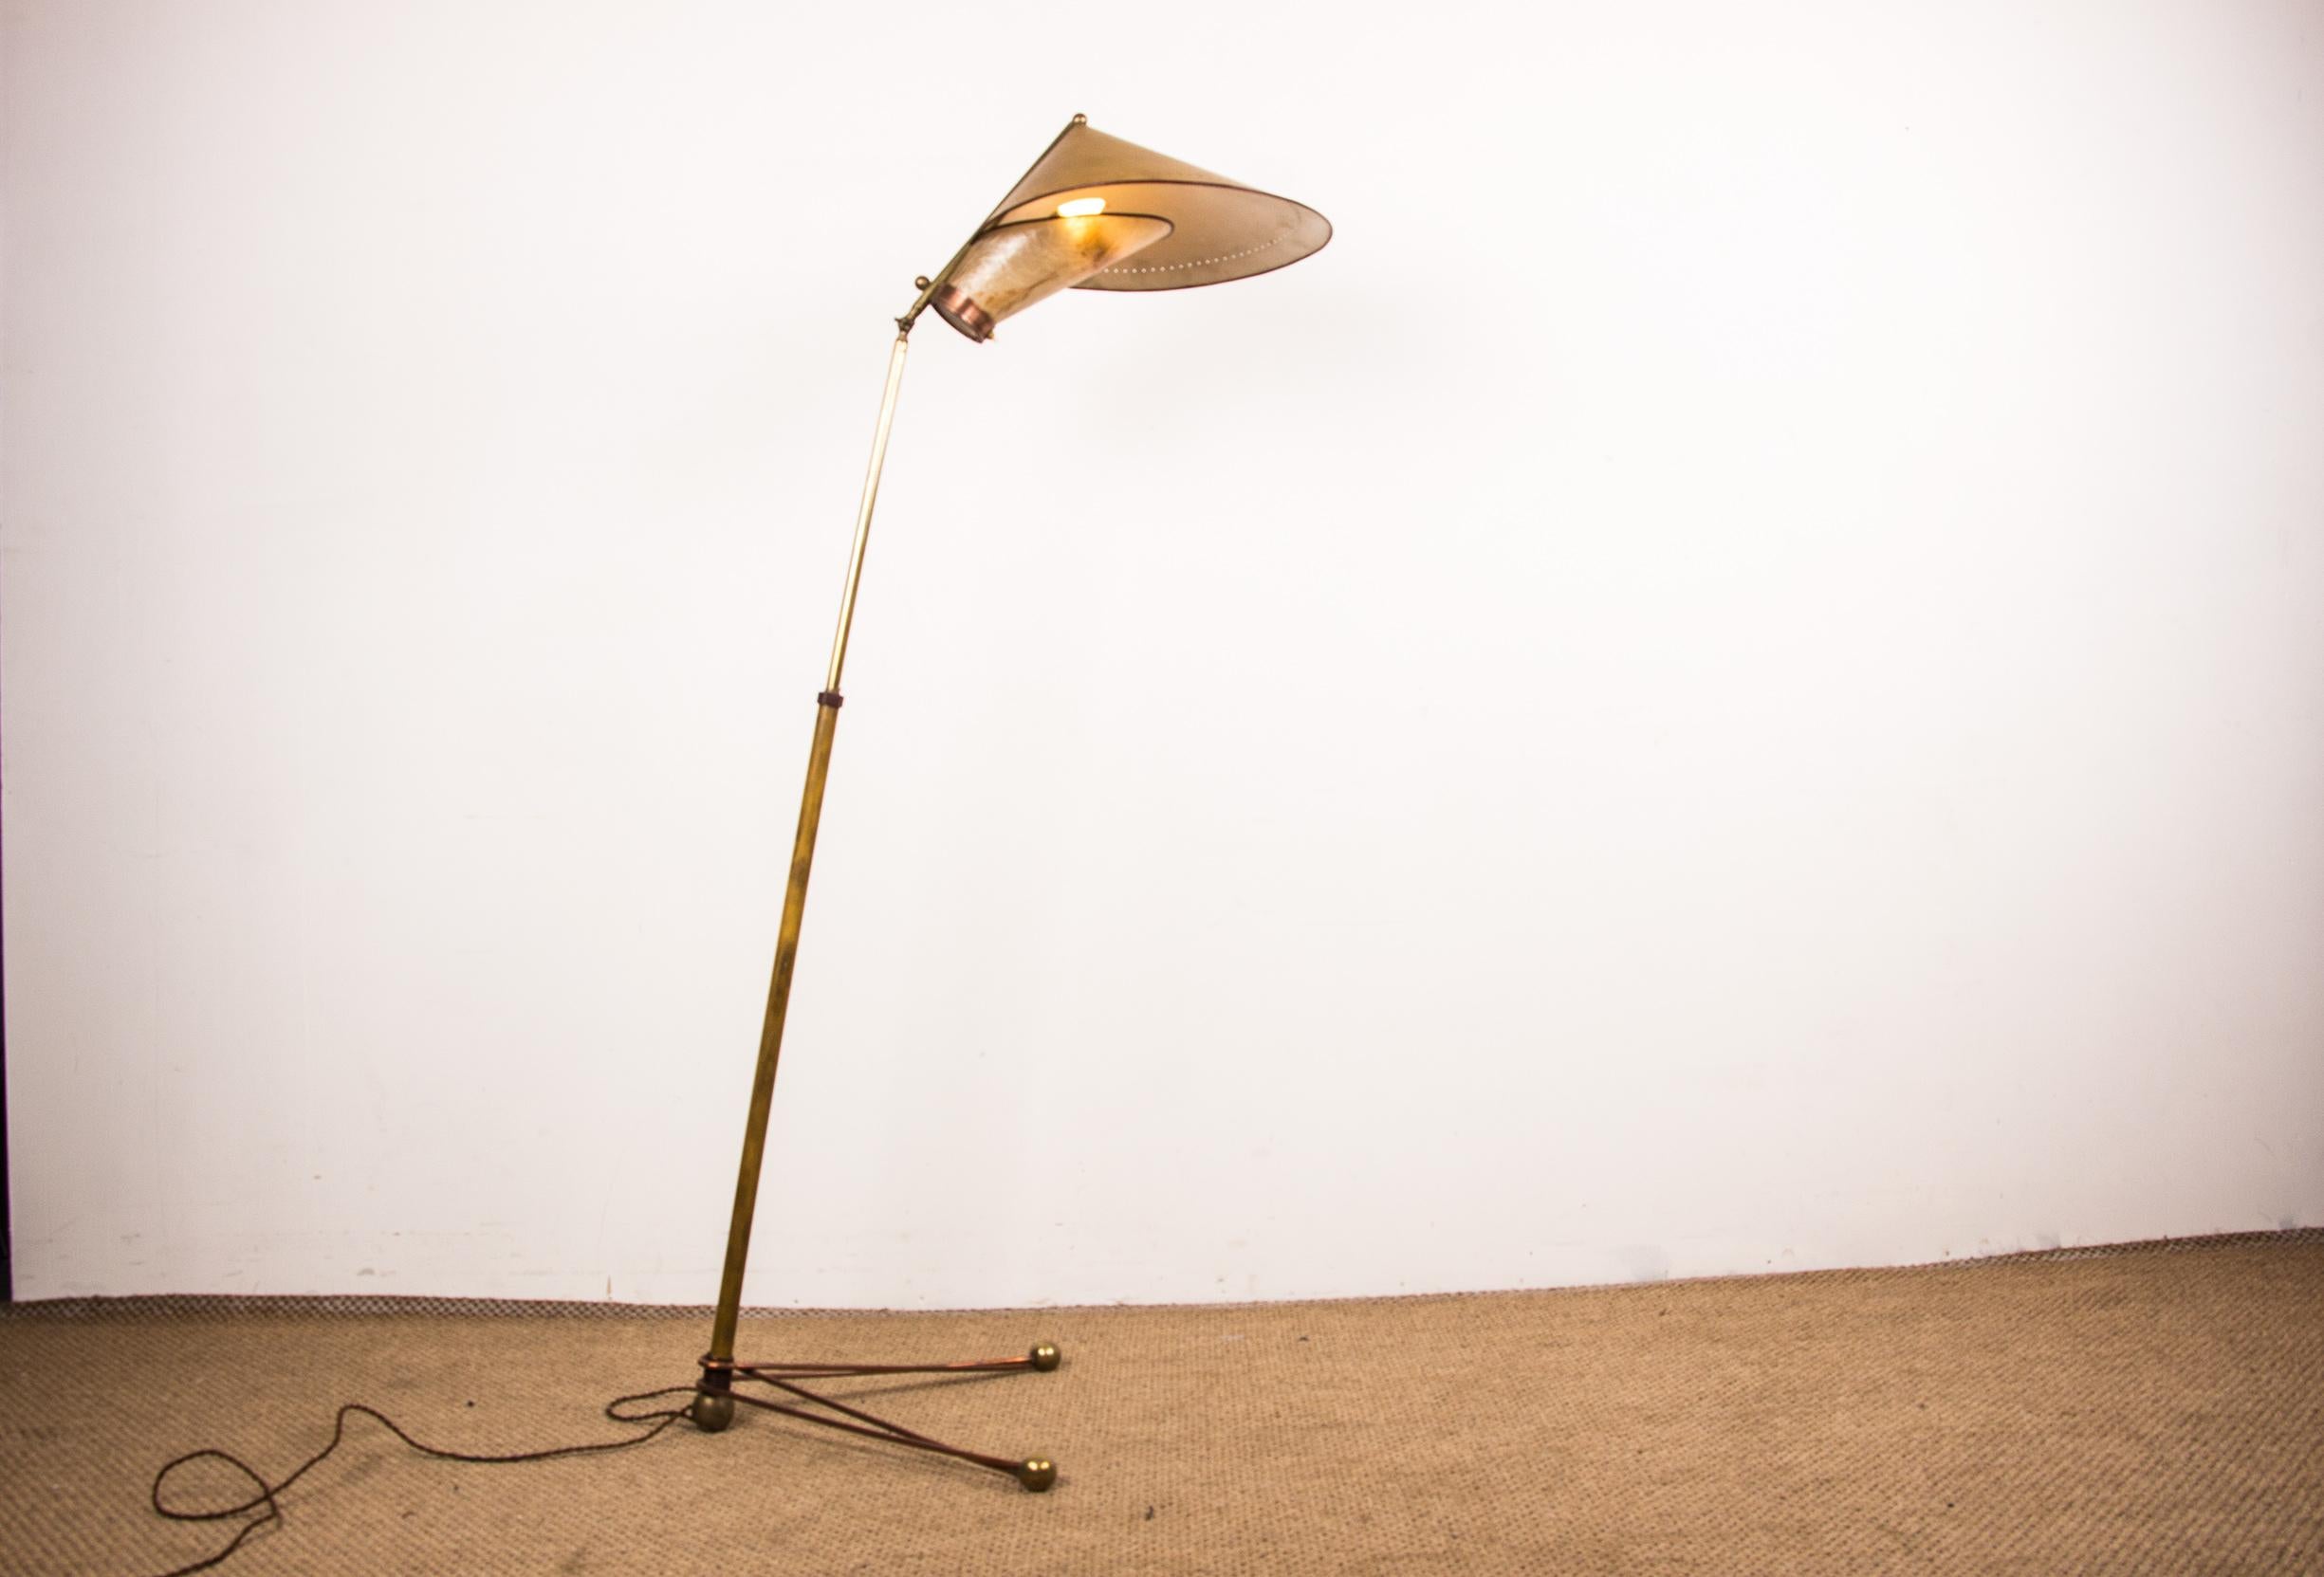 Exceptional Italian floor lamp. The light is encompassed by a cylindrical brass barrel above and a reflector, with an inlaid briar leaf, below.
V-shaped base with curved rods decorated with spheres at the ends.
The height of the floor lamp is also